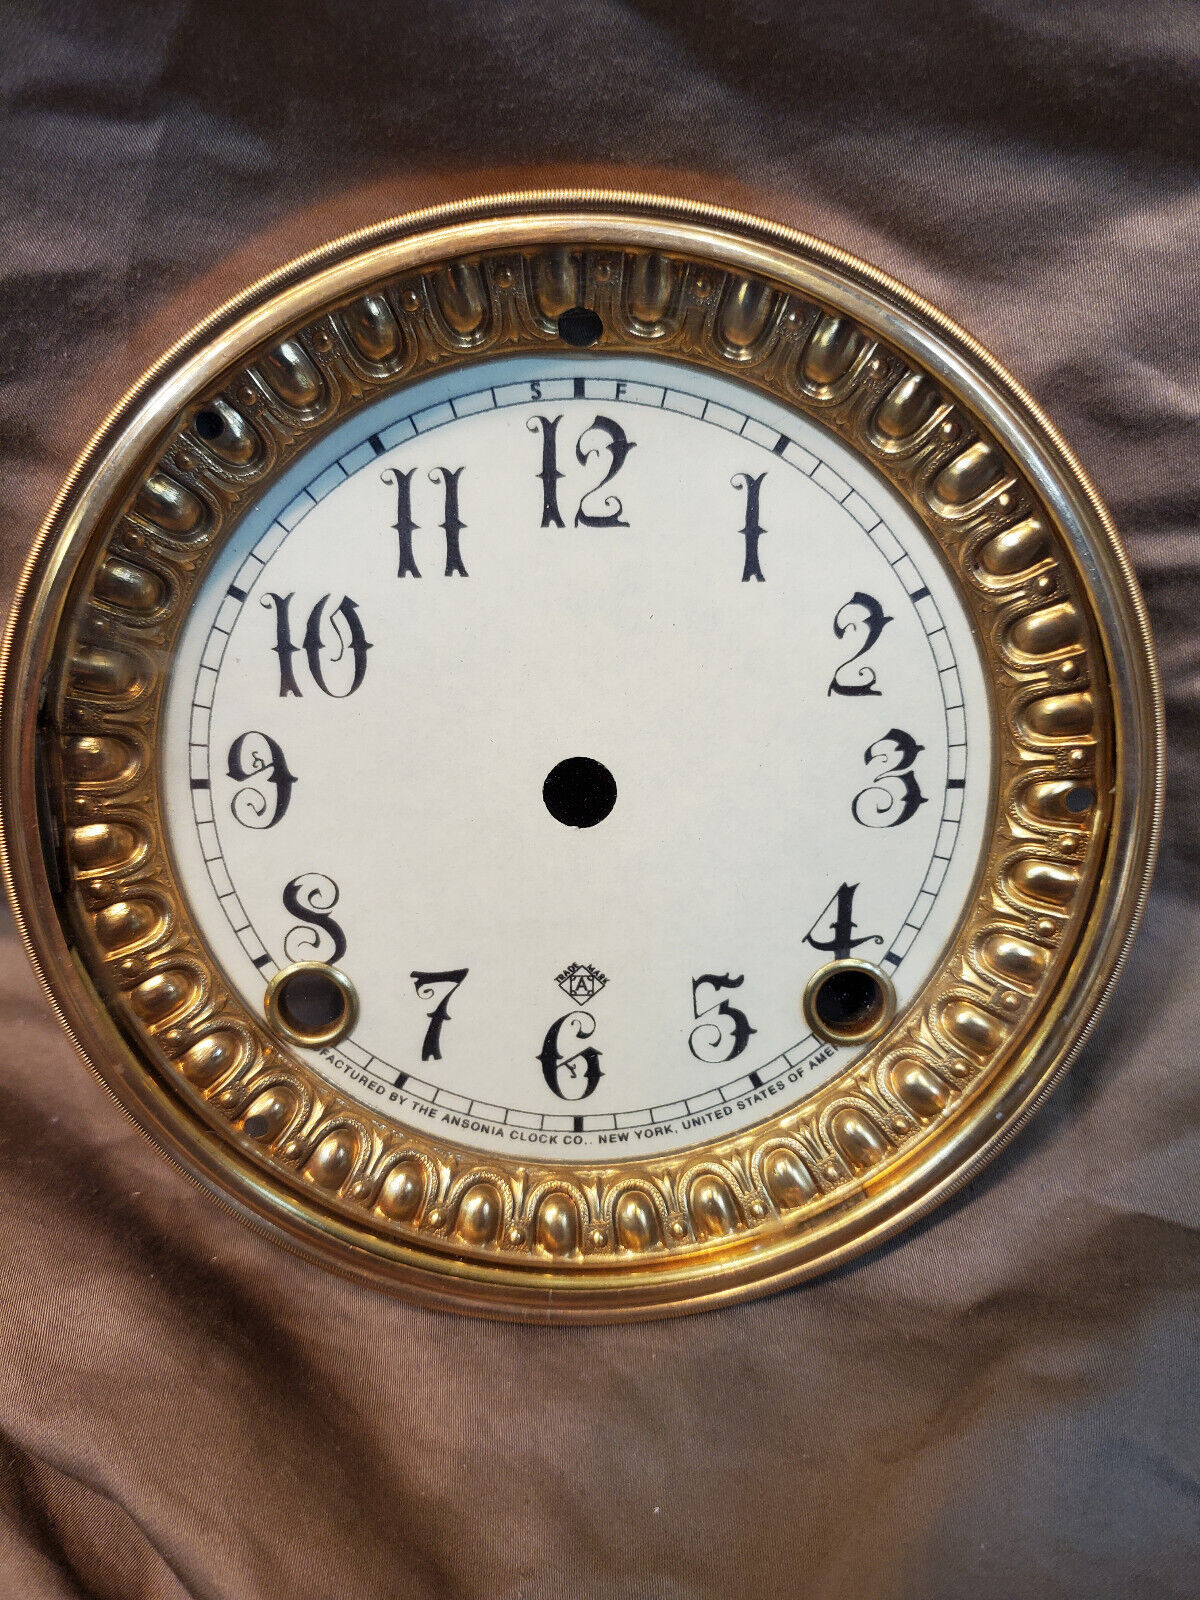 Restored Antique Ansonia Clock Dial and Bezel Refurbished